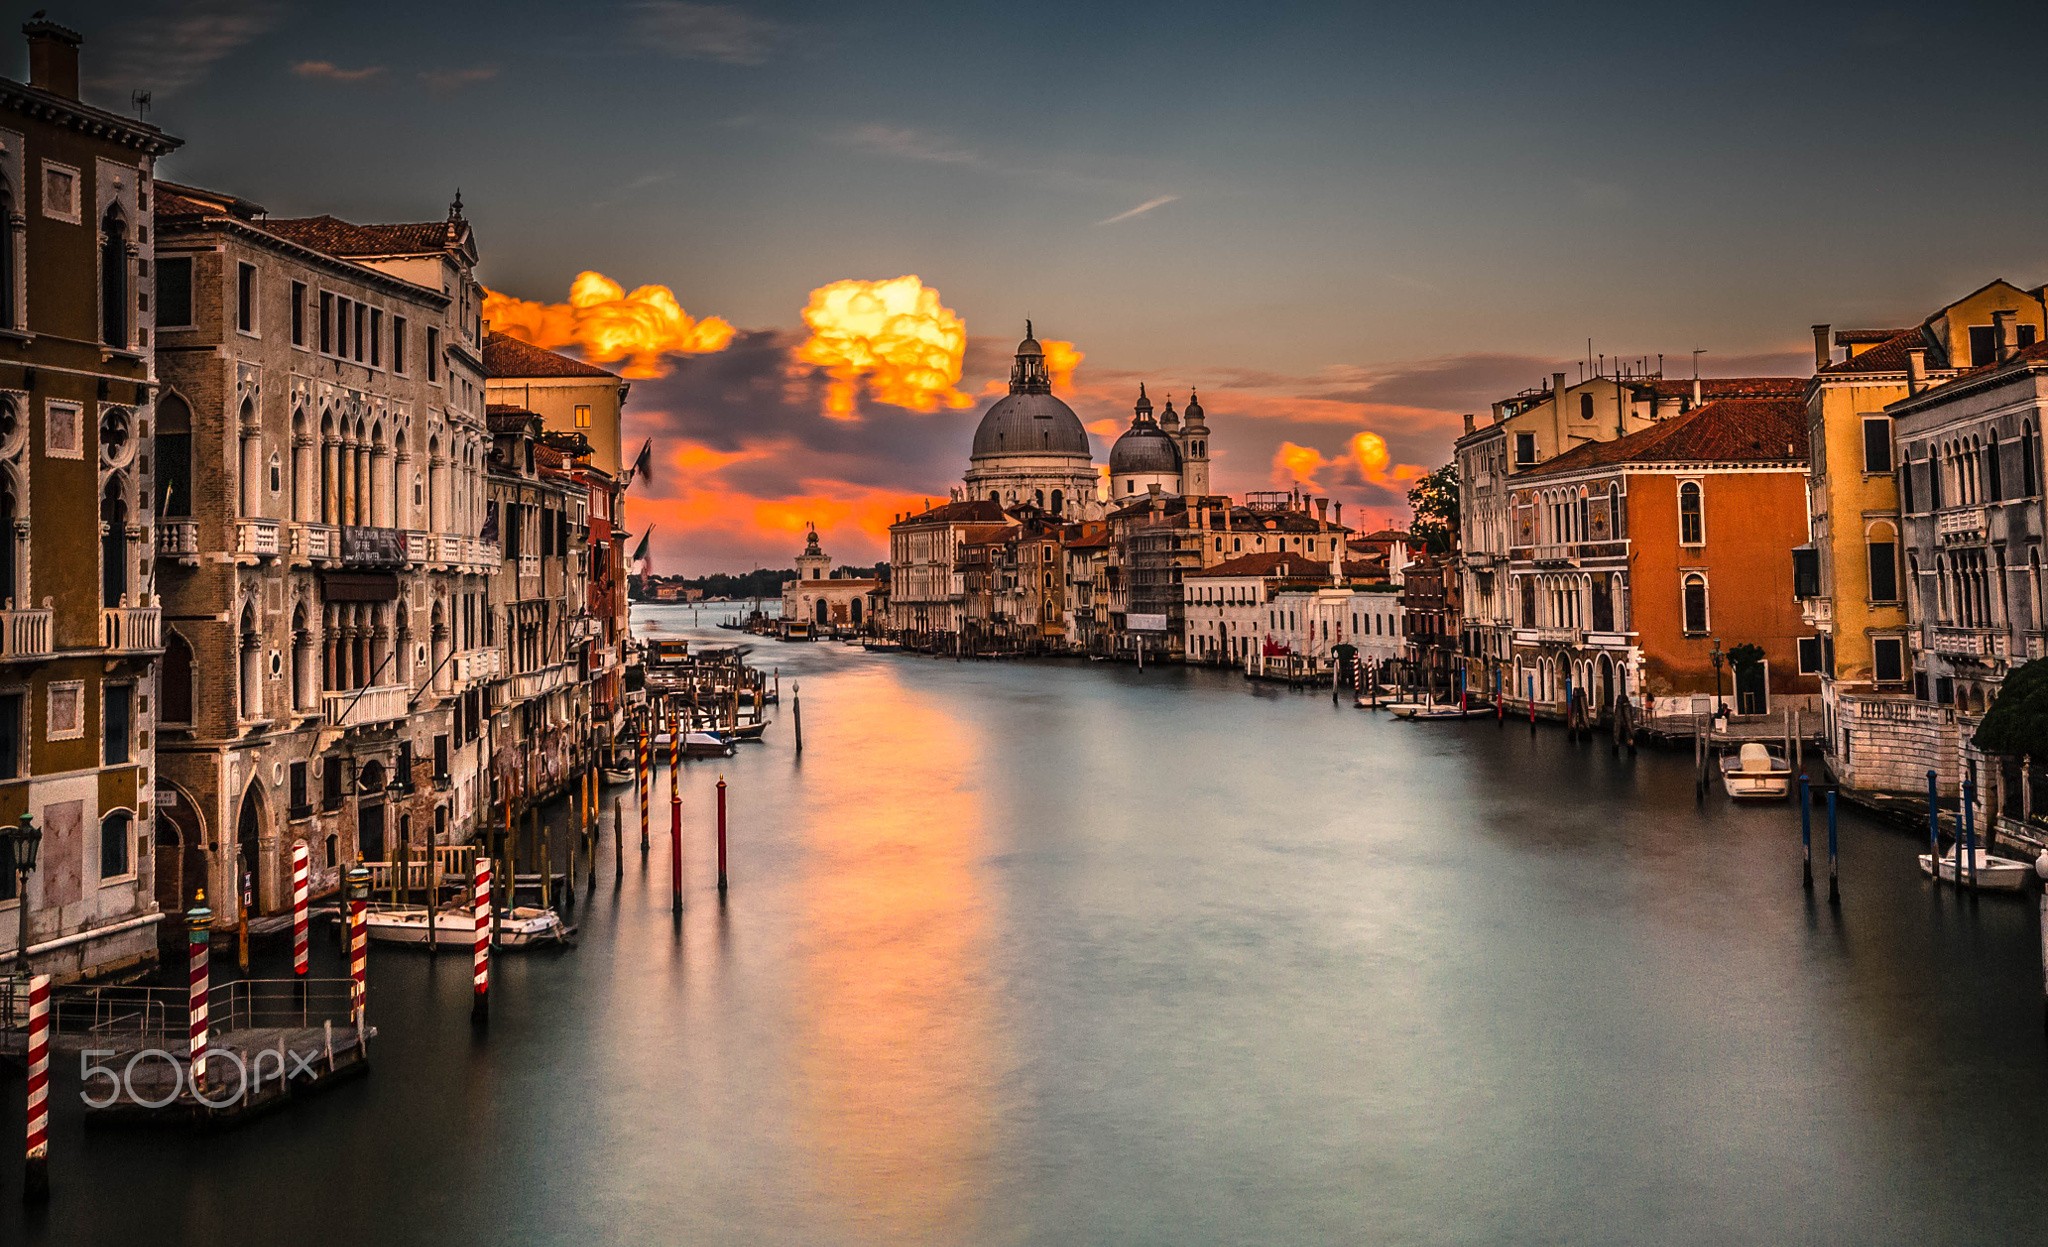 General 2048x1247 Venice Grand Canal cityscape canal Italy sunlight city water